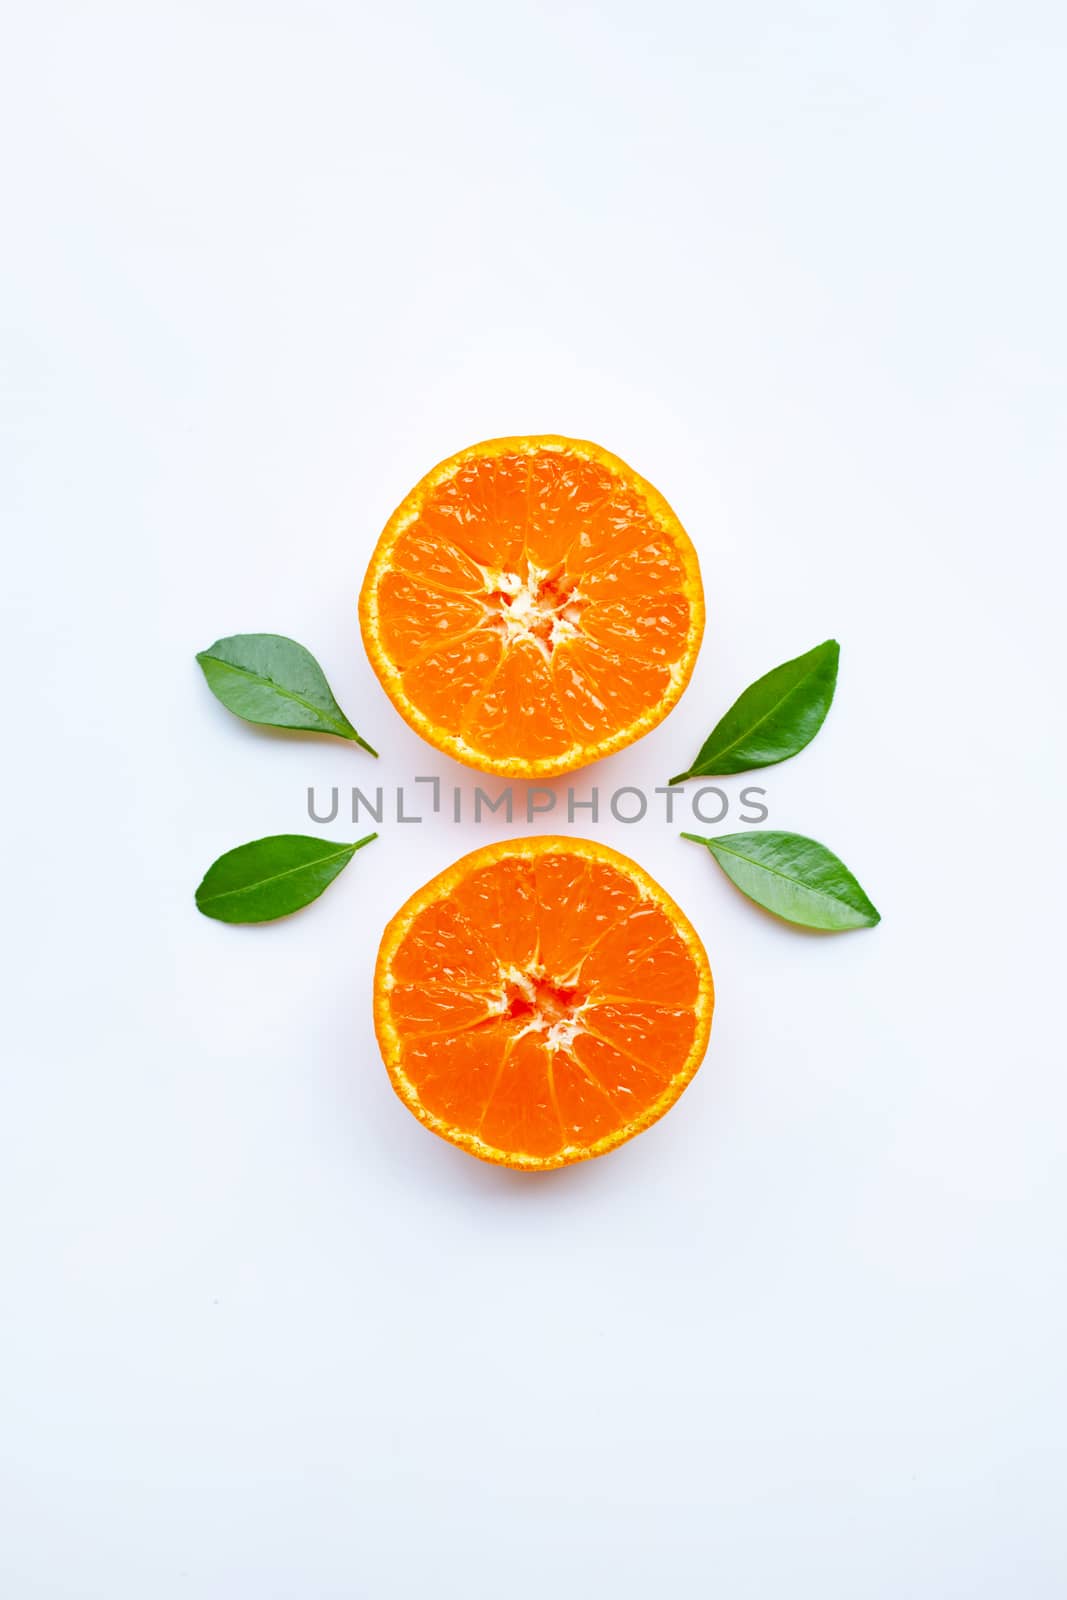 Orange fruits and green leaves on a white background.  by Bowonpat